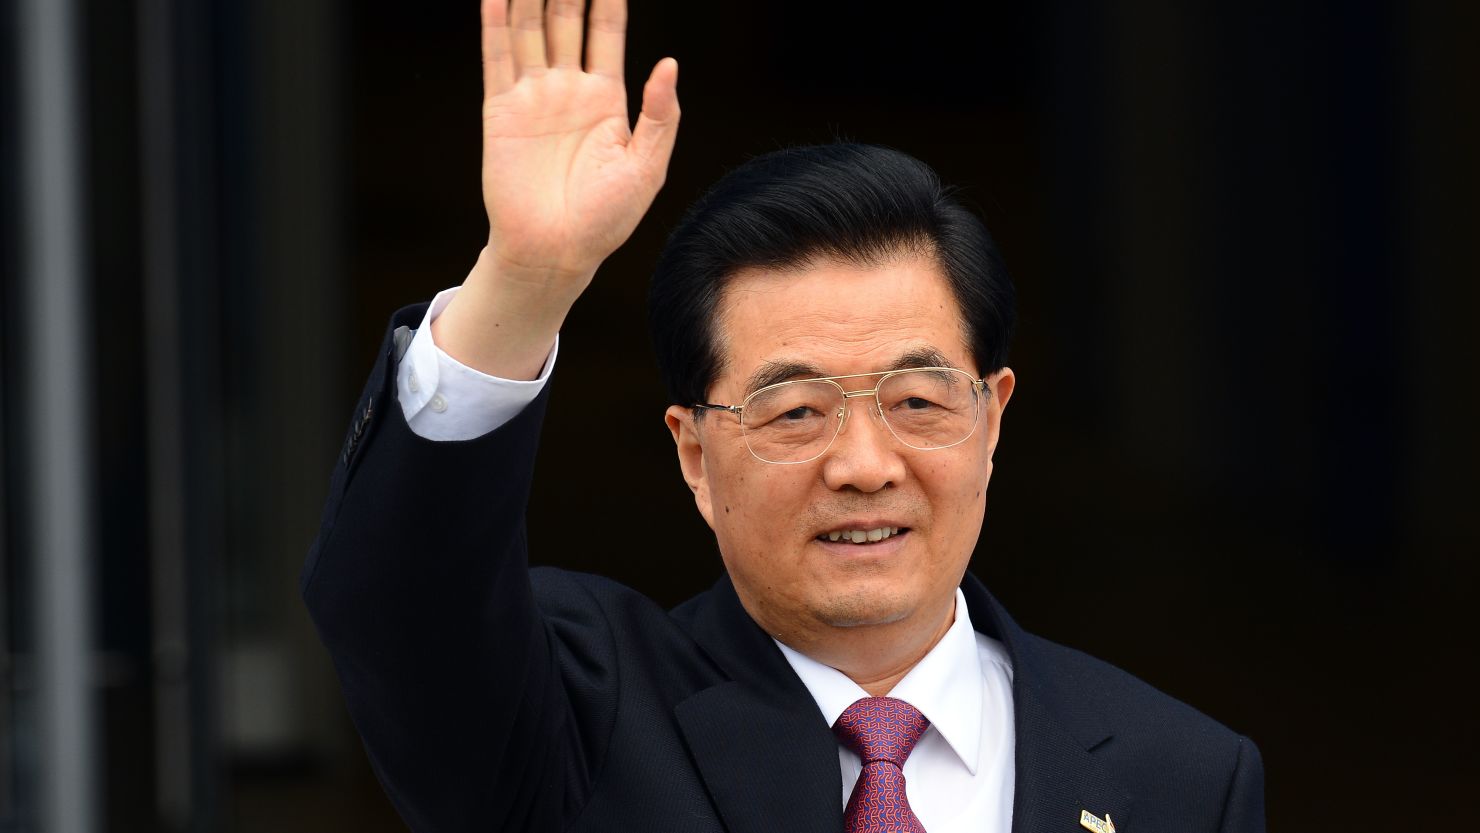 Chinese President Hu Jintao arrives to attend an APEC summit in the Russian city of Vladivostok on September 8, 2012.